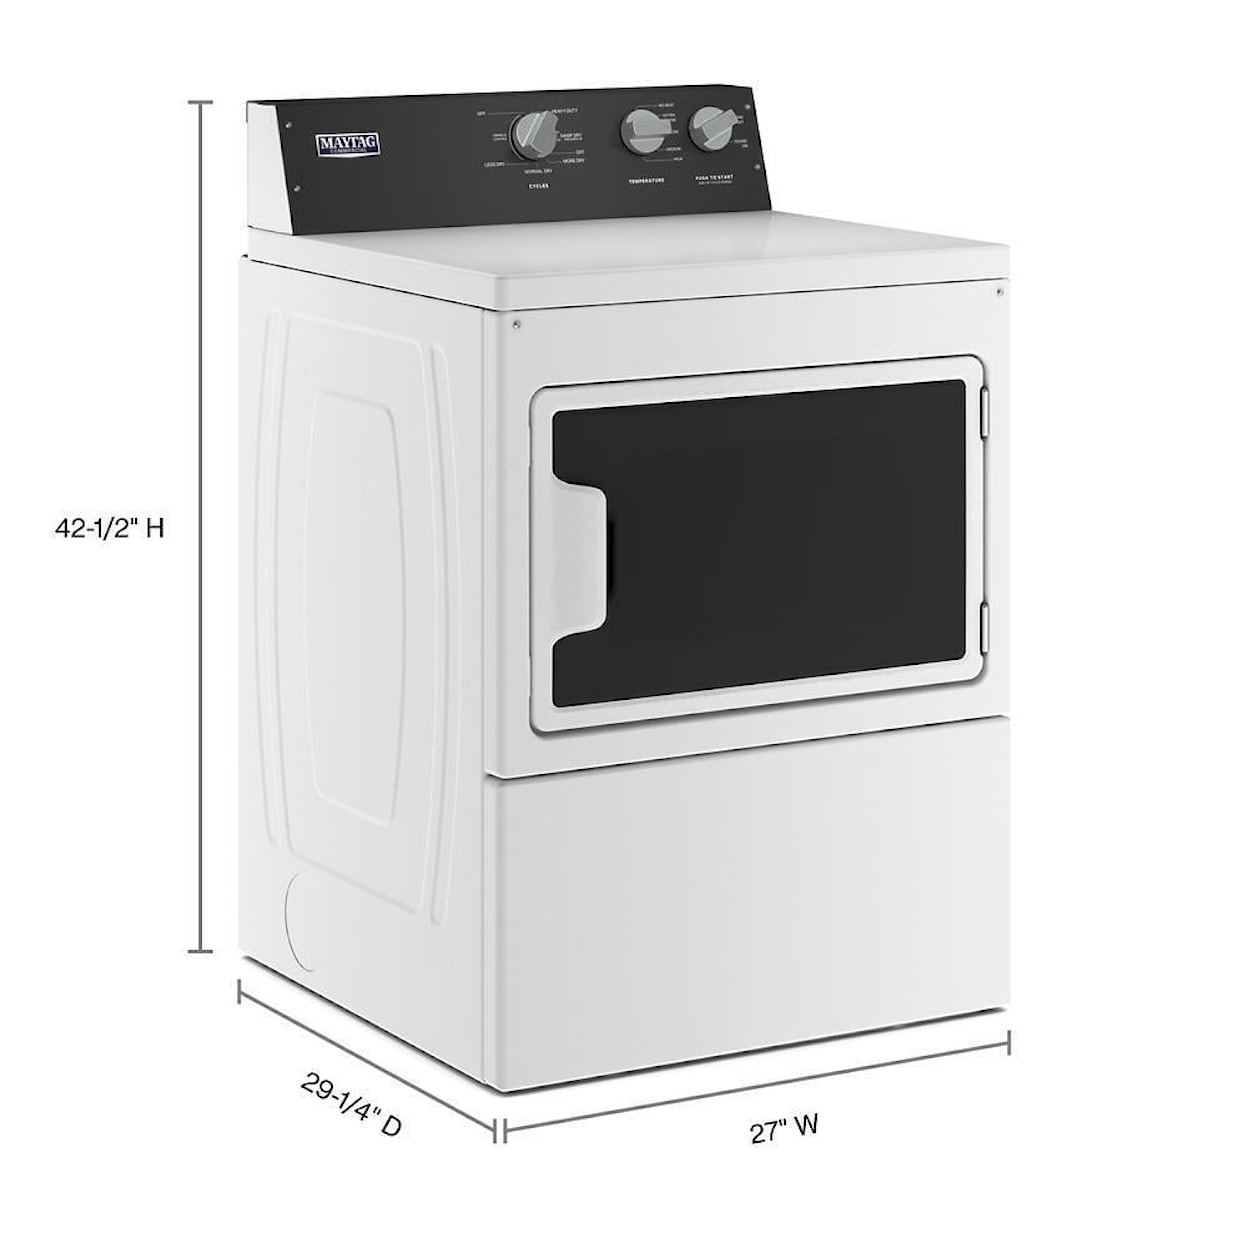 Maytag Laundry Front Load Gas Dryer